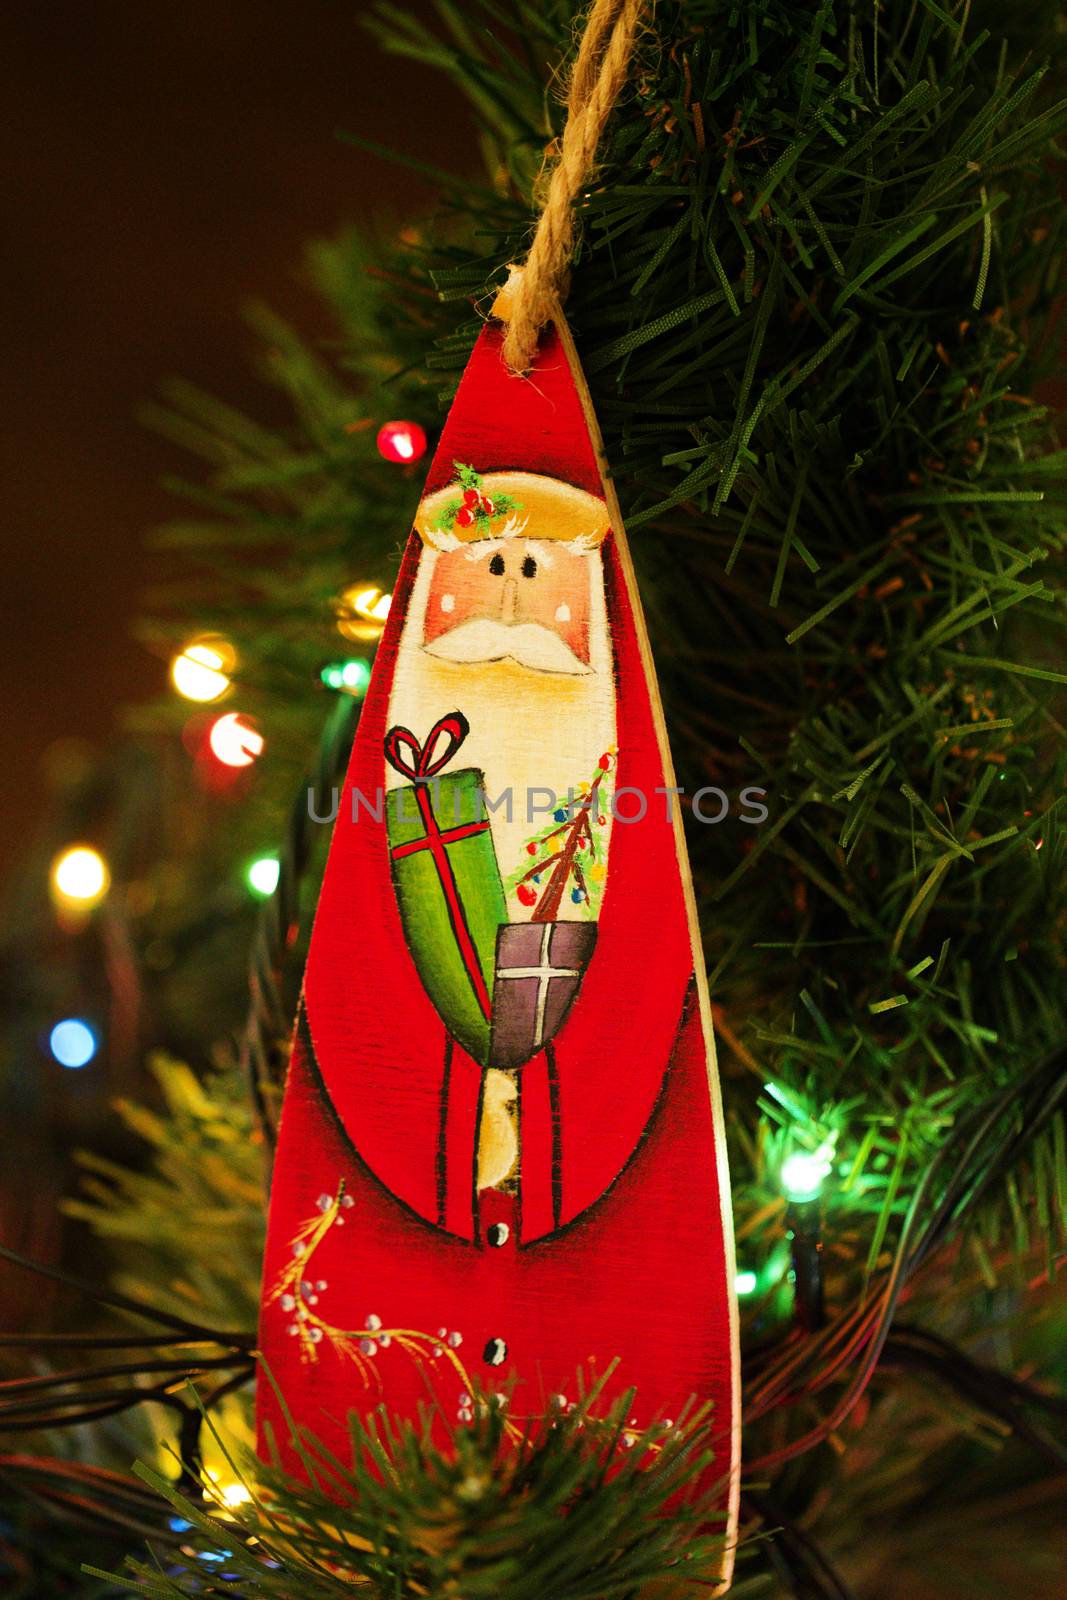 Toy hanging on the Christmas tree. toy of santa claus. Santa Claus christmas decoration